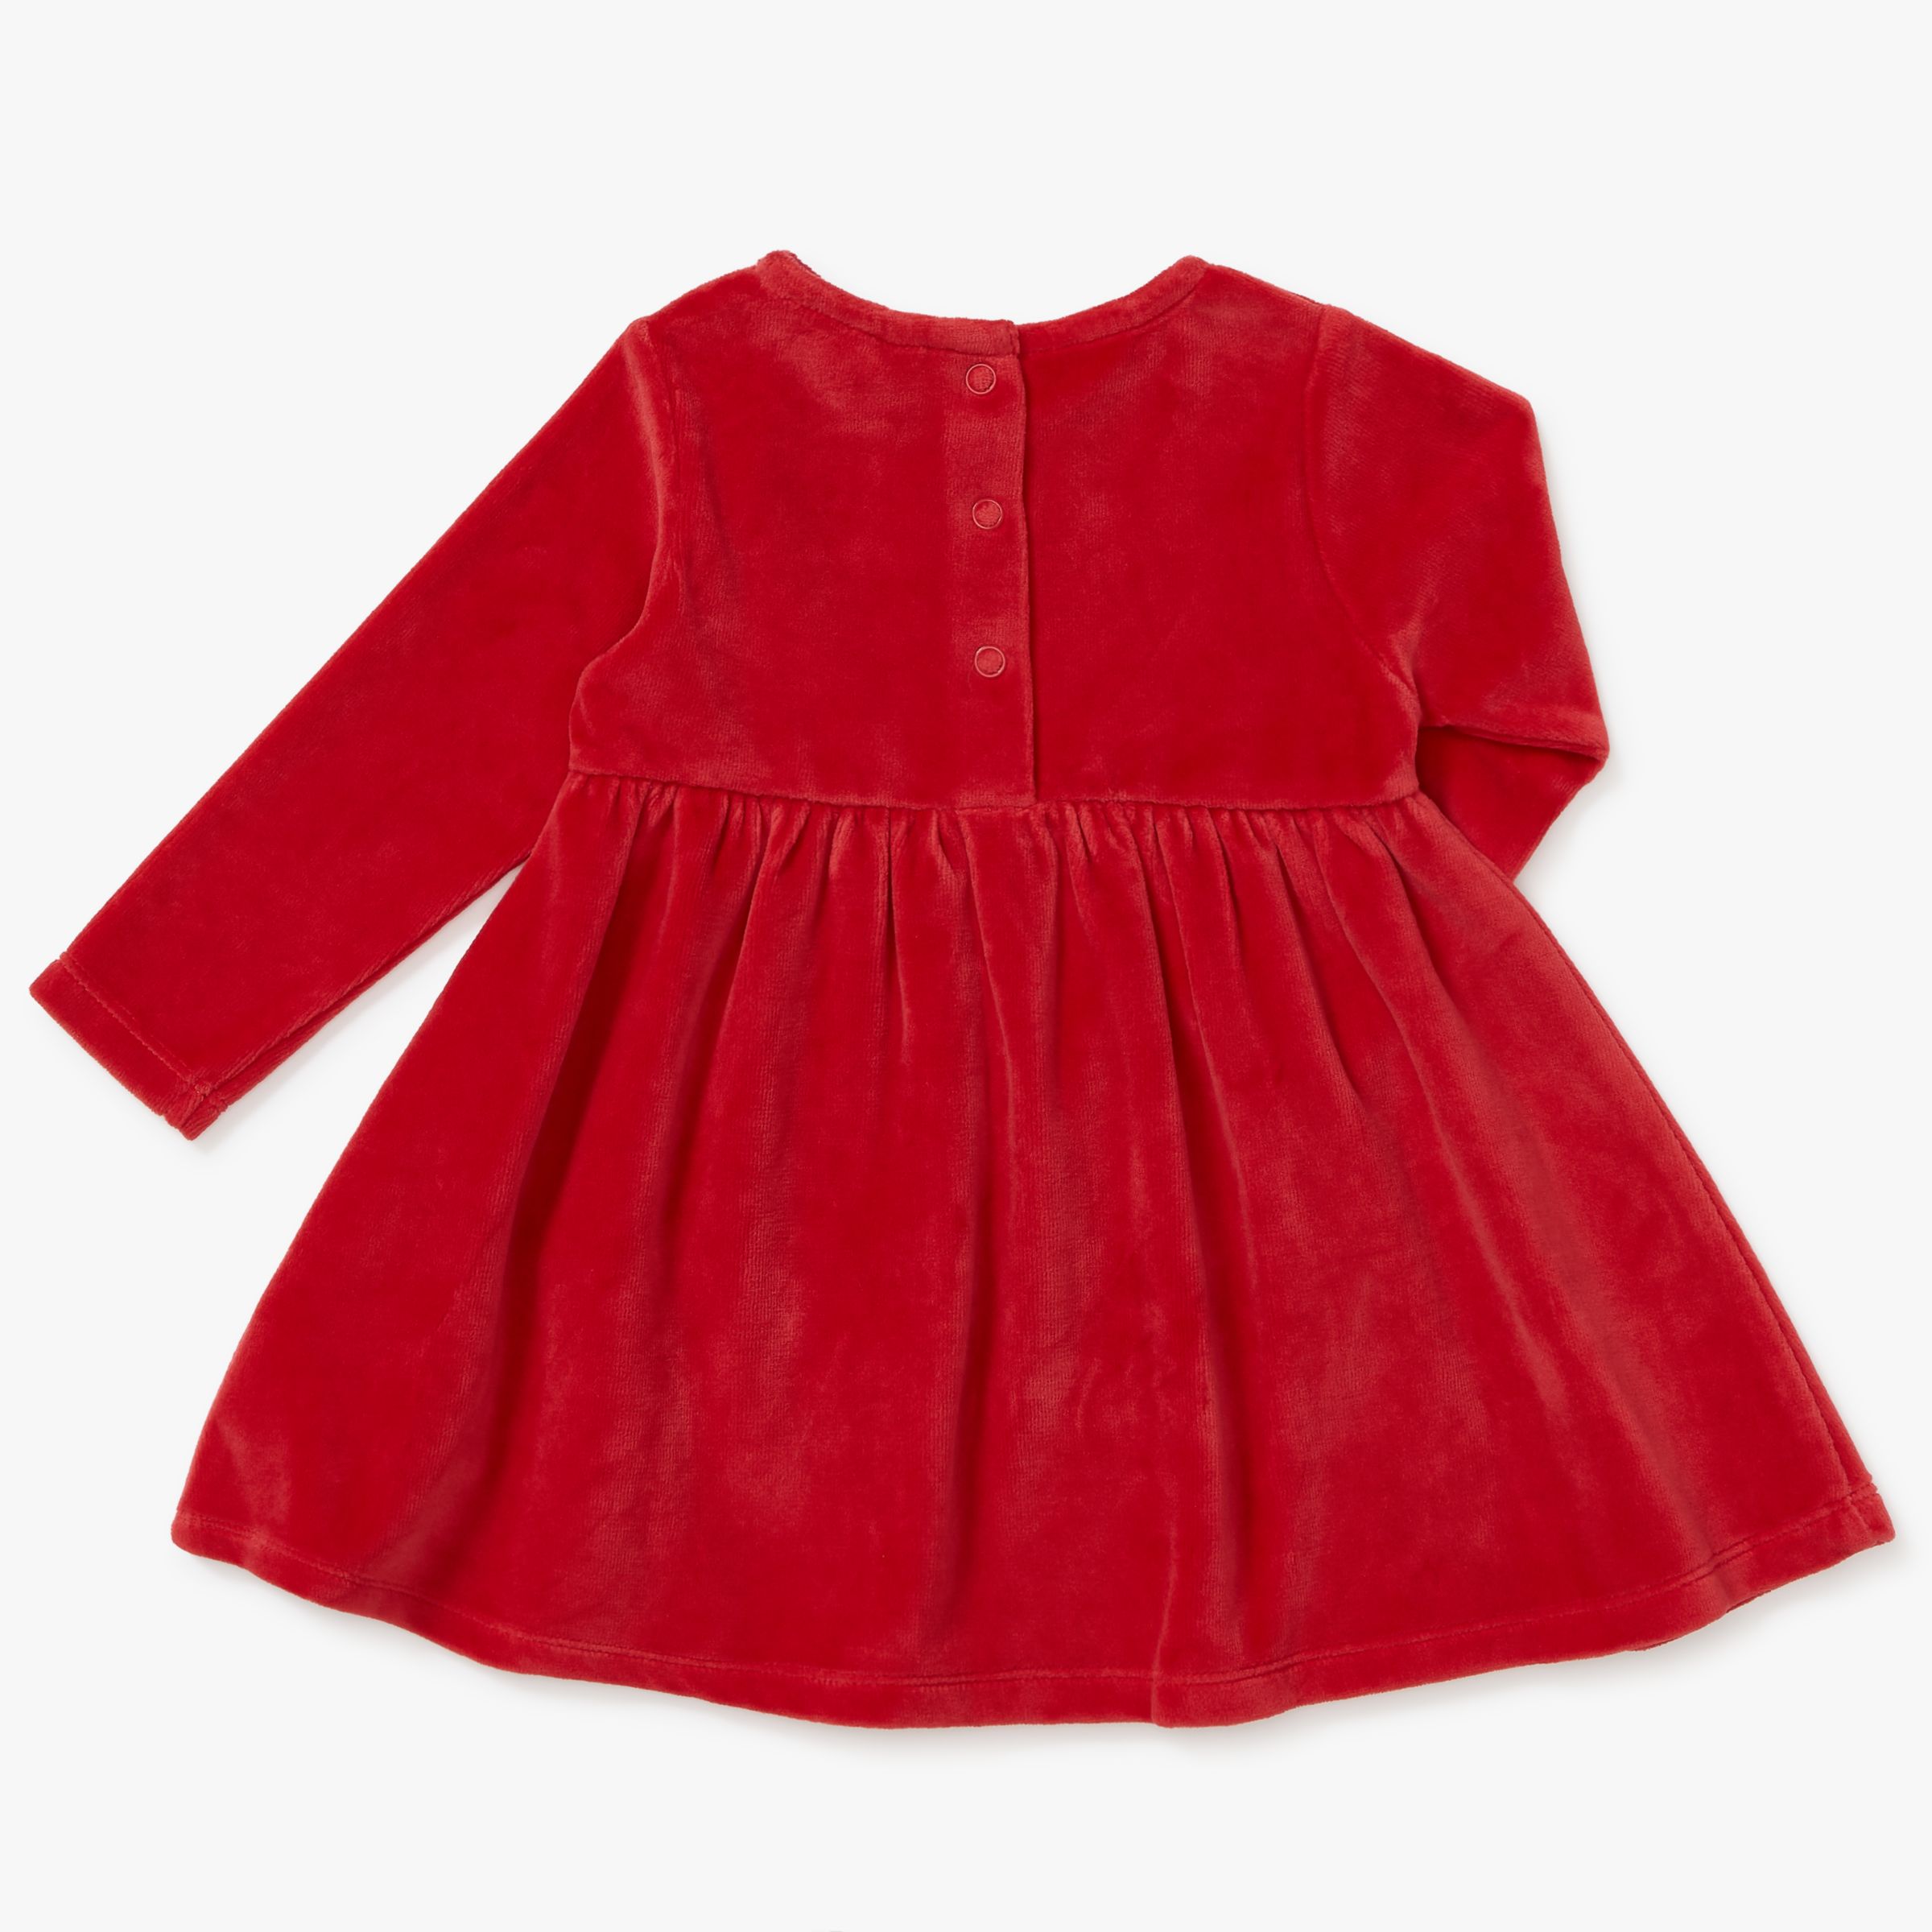 john lewis christmas outfit